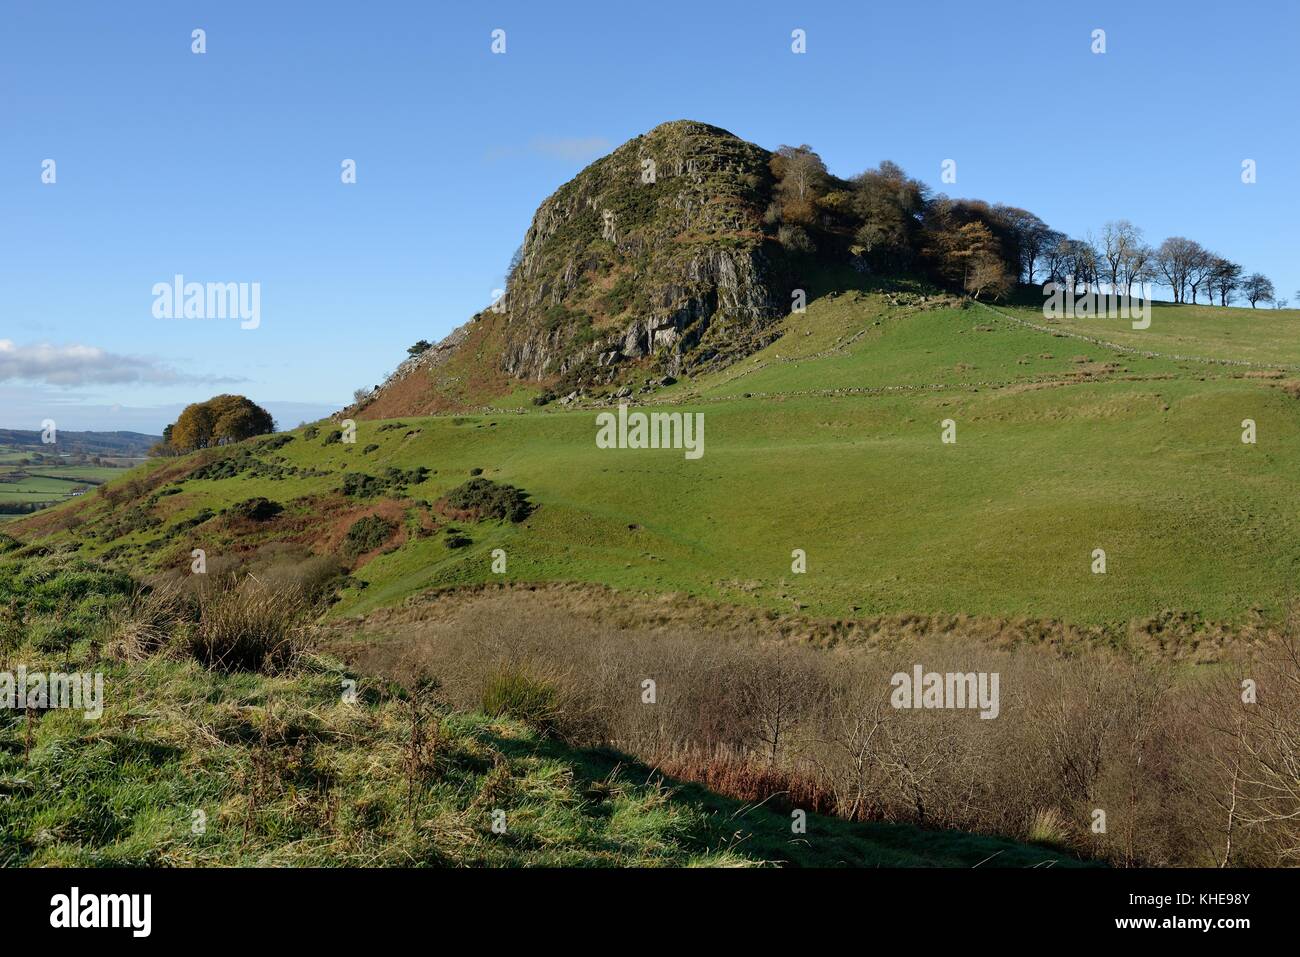 The battle of Loudoun Hill is believed to have taken place close to this volcanic plug, East Ayrshire, Scotland, UK. Stock Photo